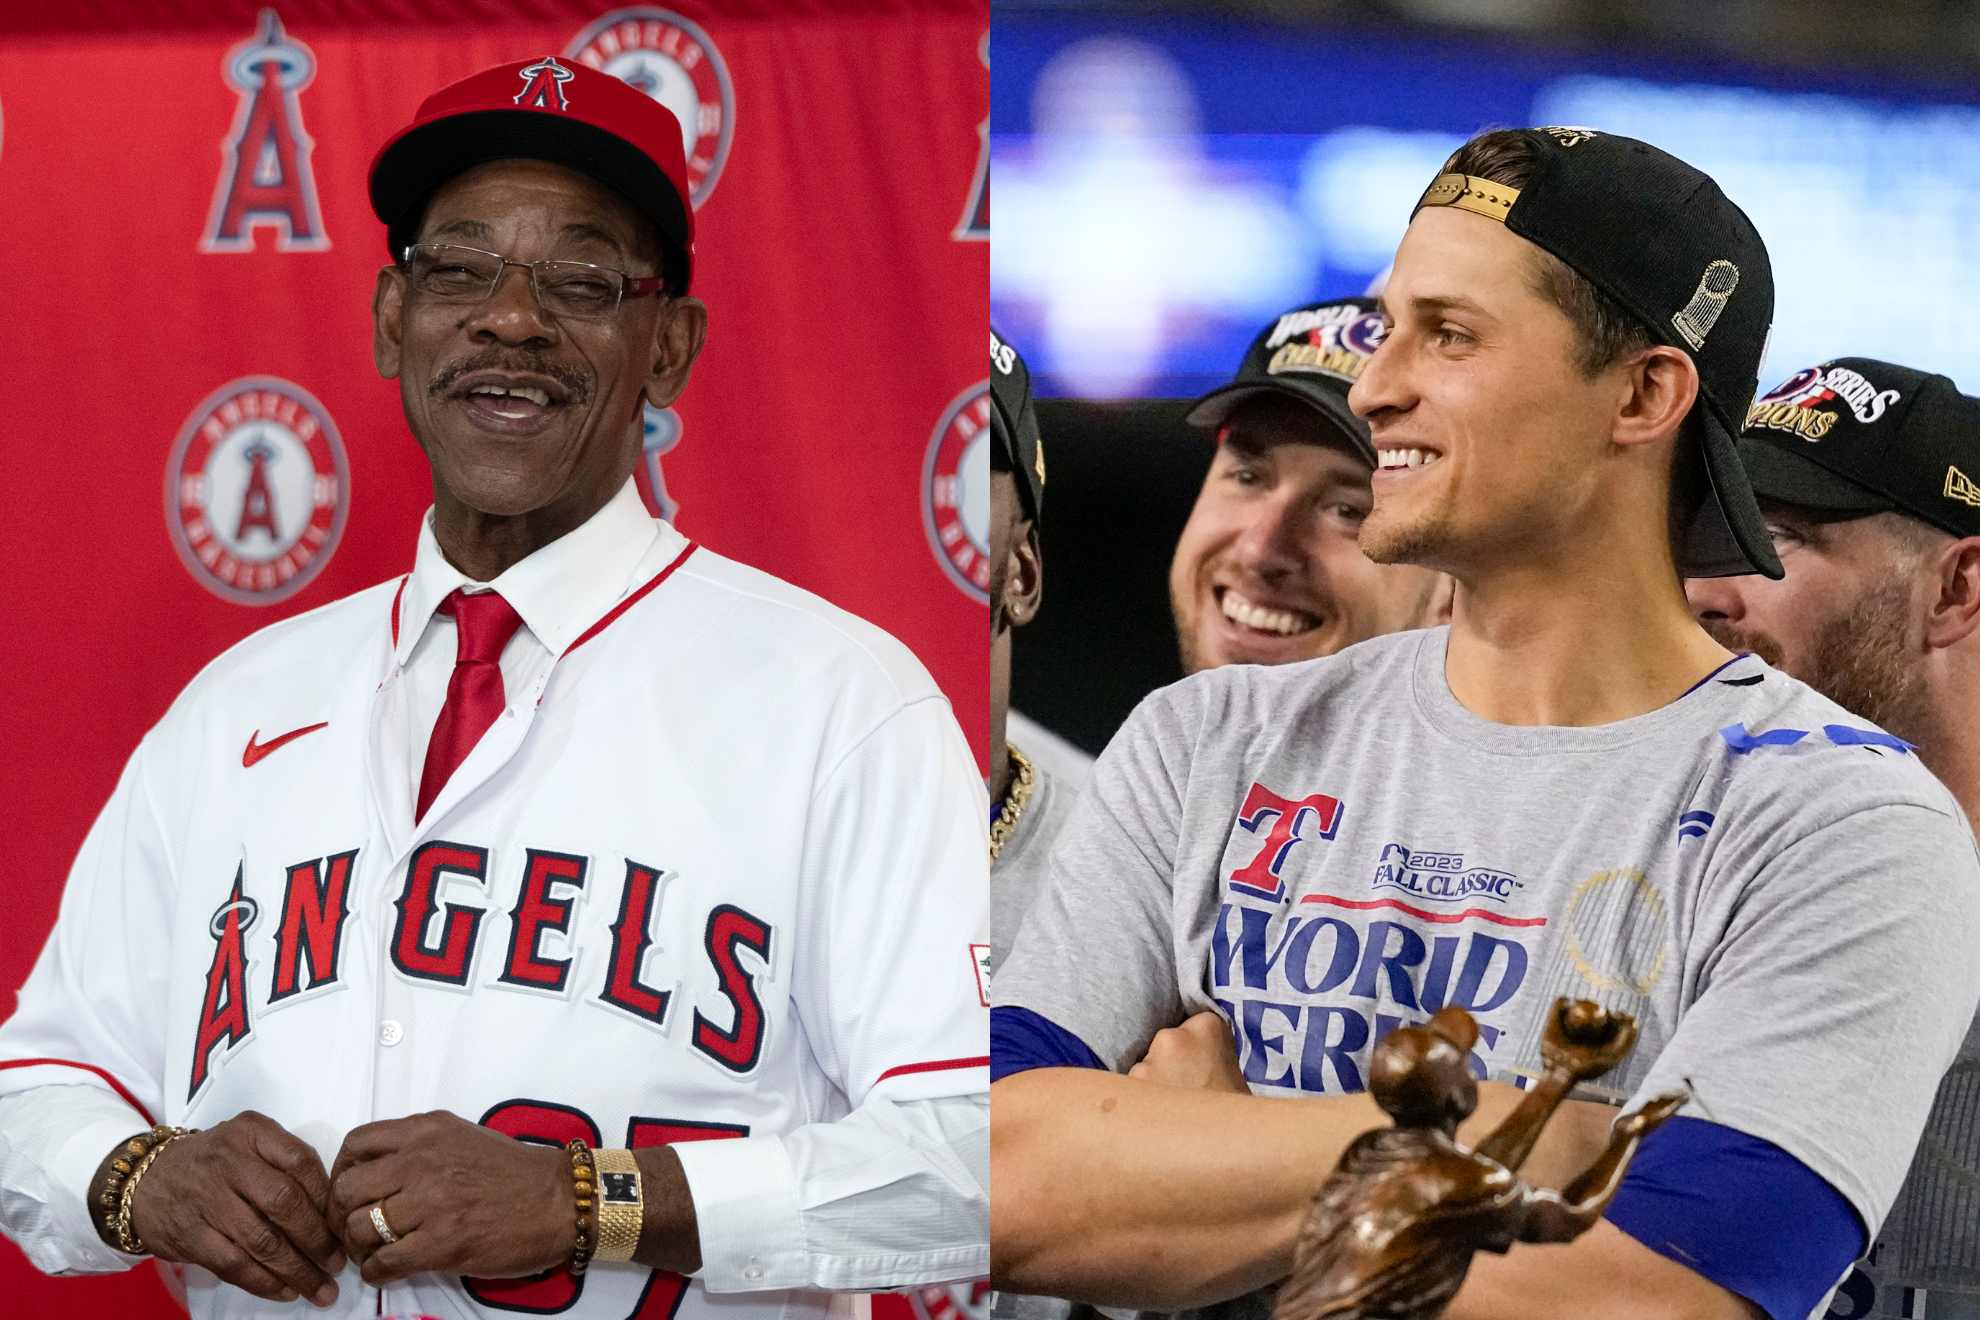 Can Washingtons Angels dethrone Corey Seager and the Rangers?